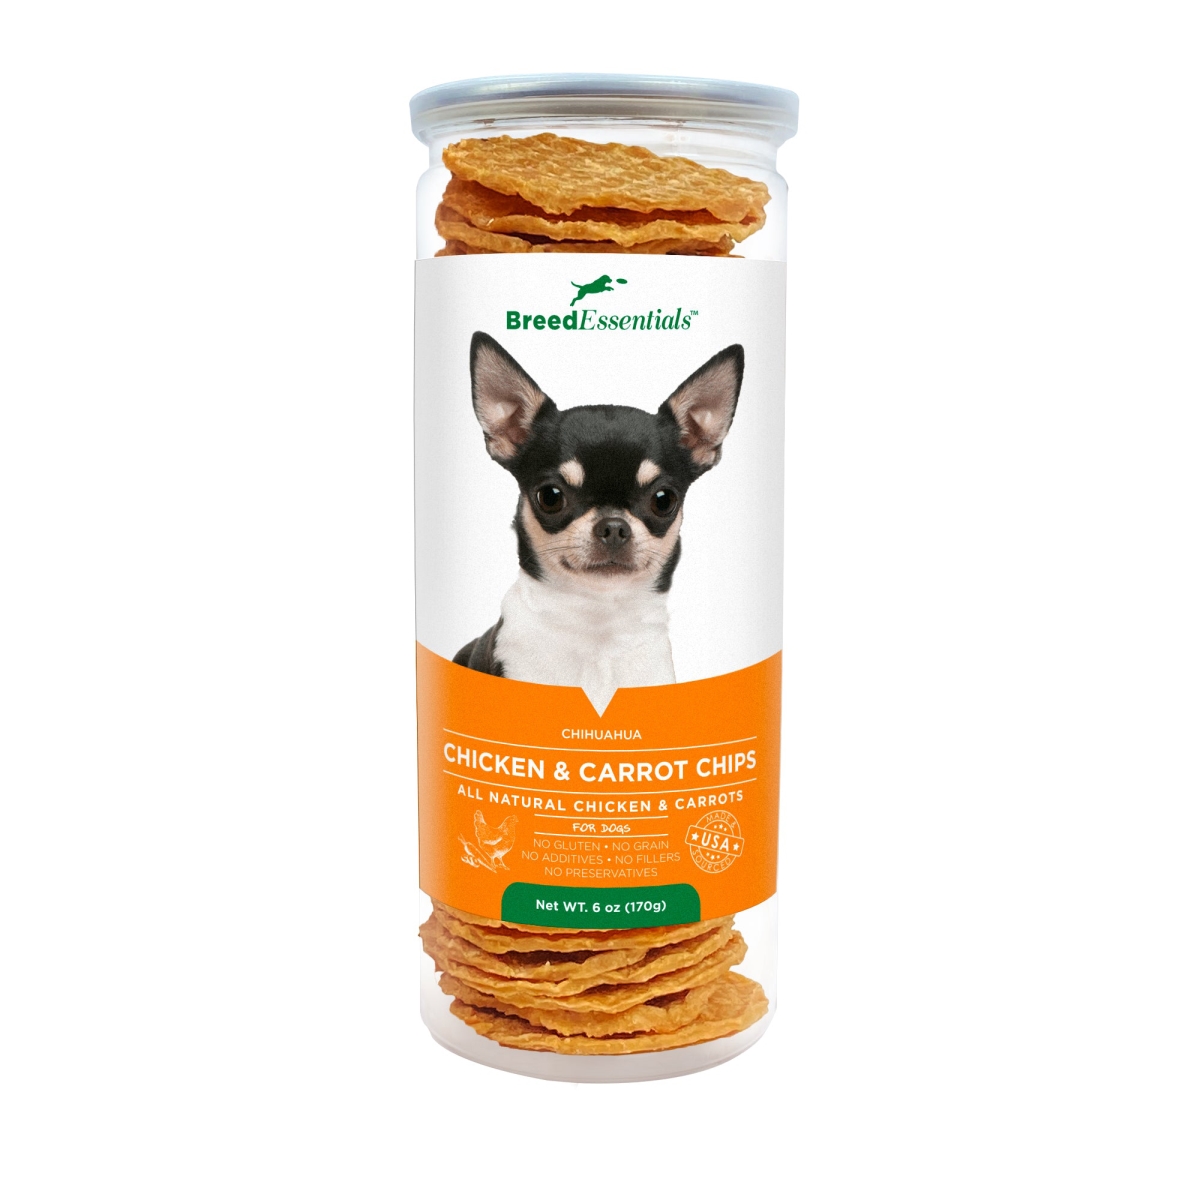 Picture of Breed Essentials 197247000587 6 oz Chicken & Carrot Chips - Chihuahua